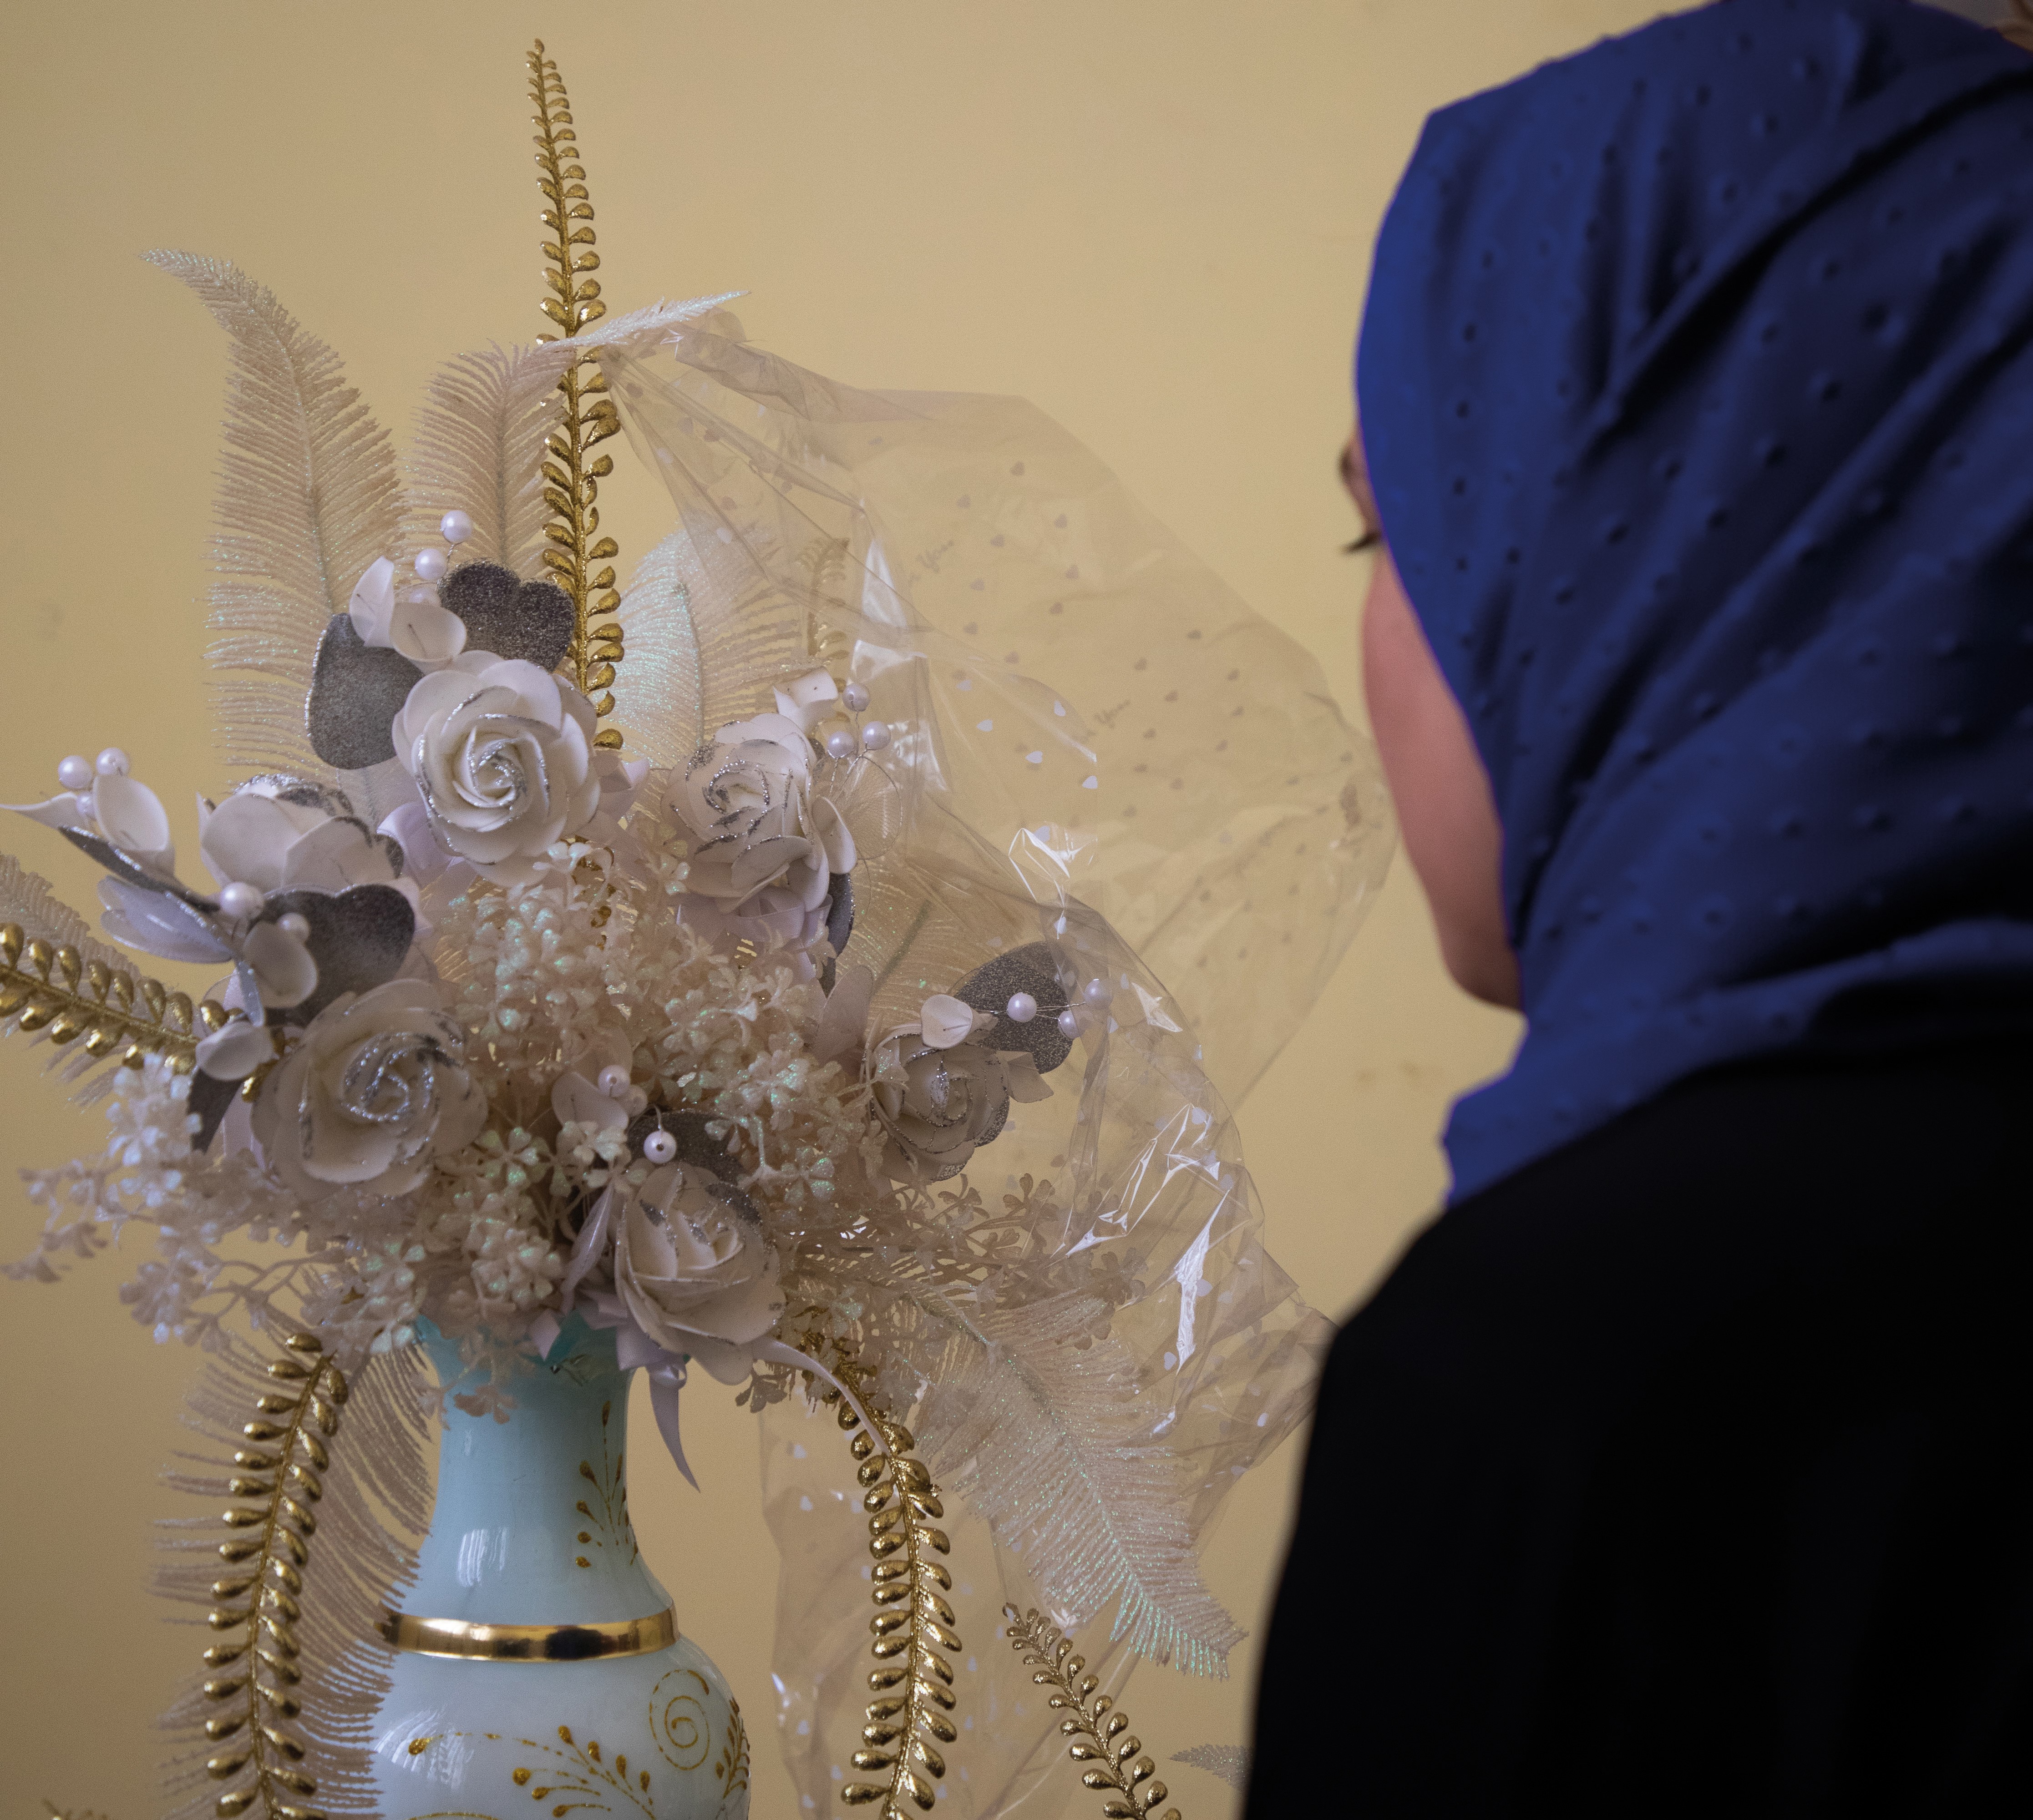 Girl in Afghanistan looks away from the camera towards flower decorations prepared for her child marriage